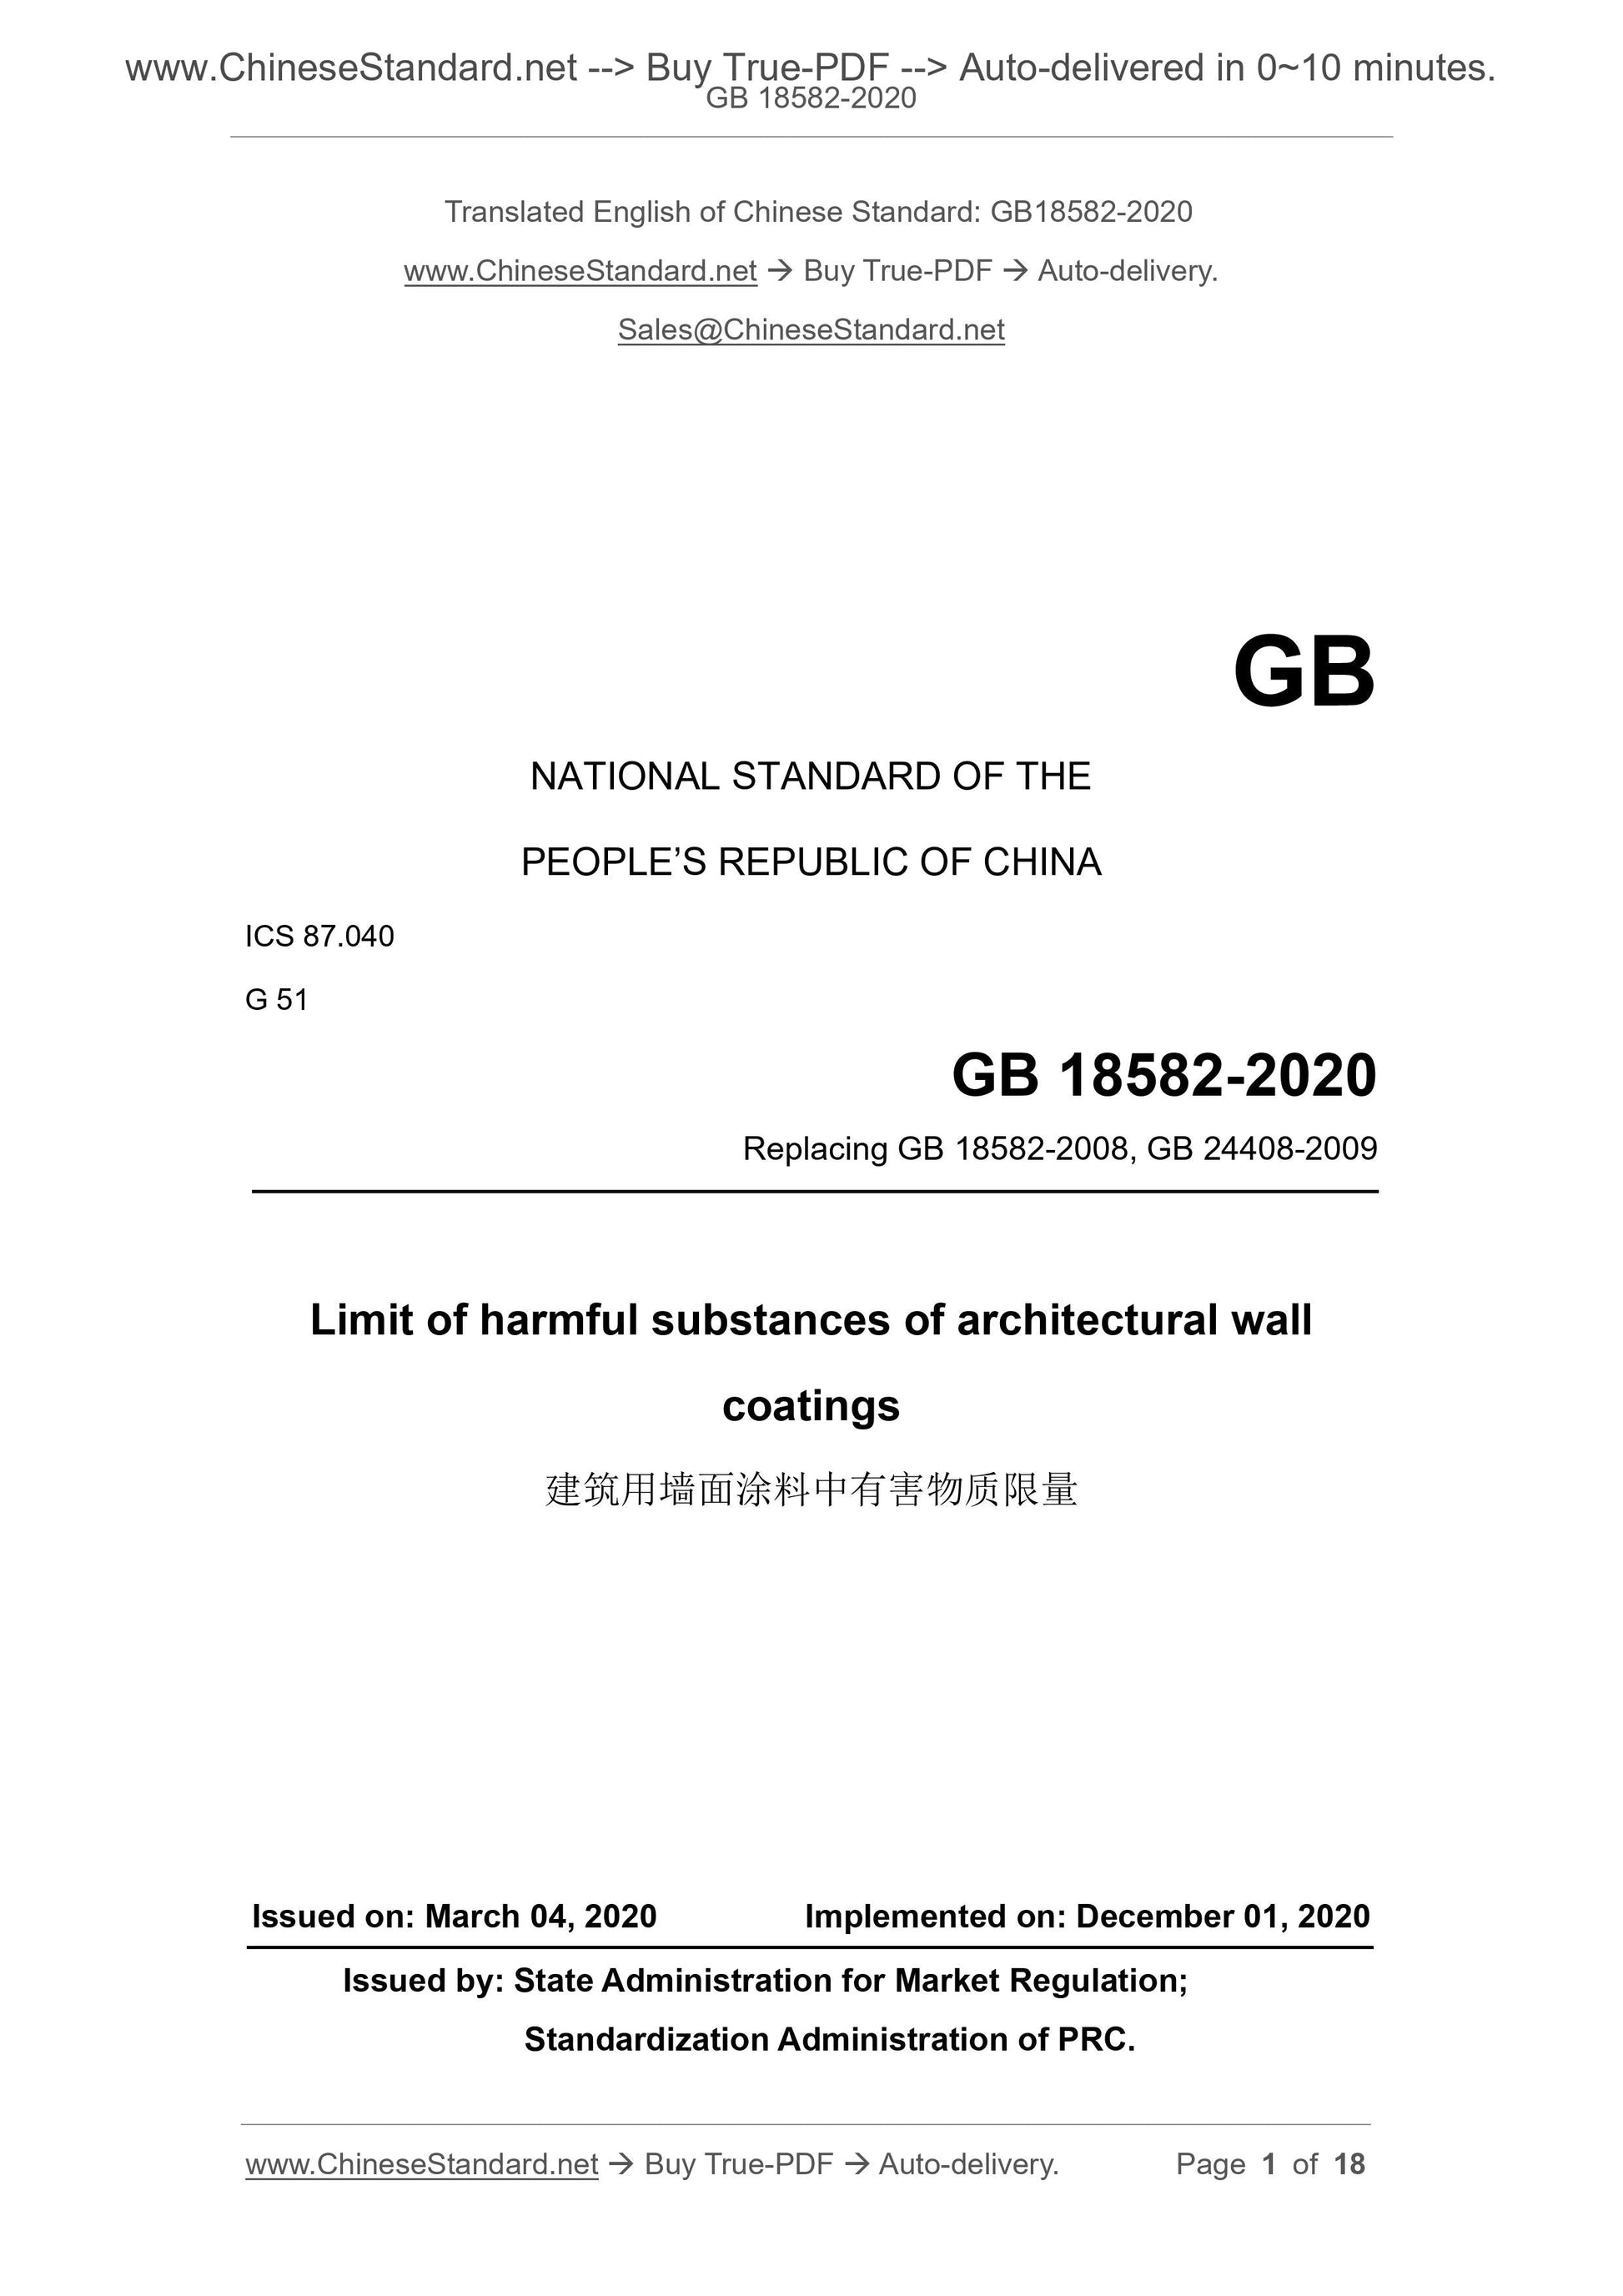 GB 18582-2020 Page 1